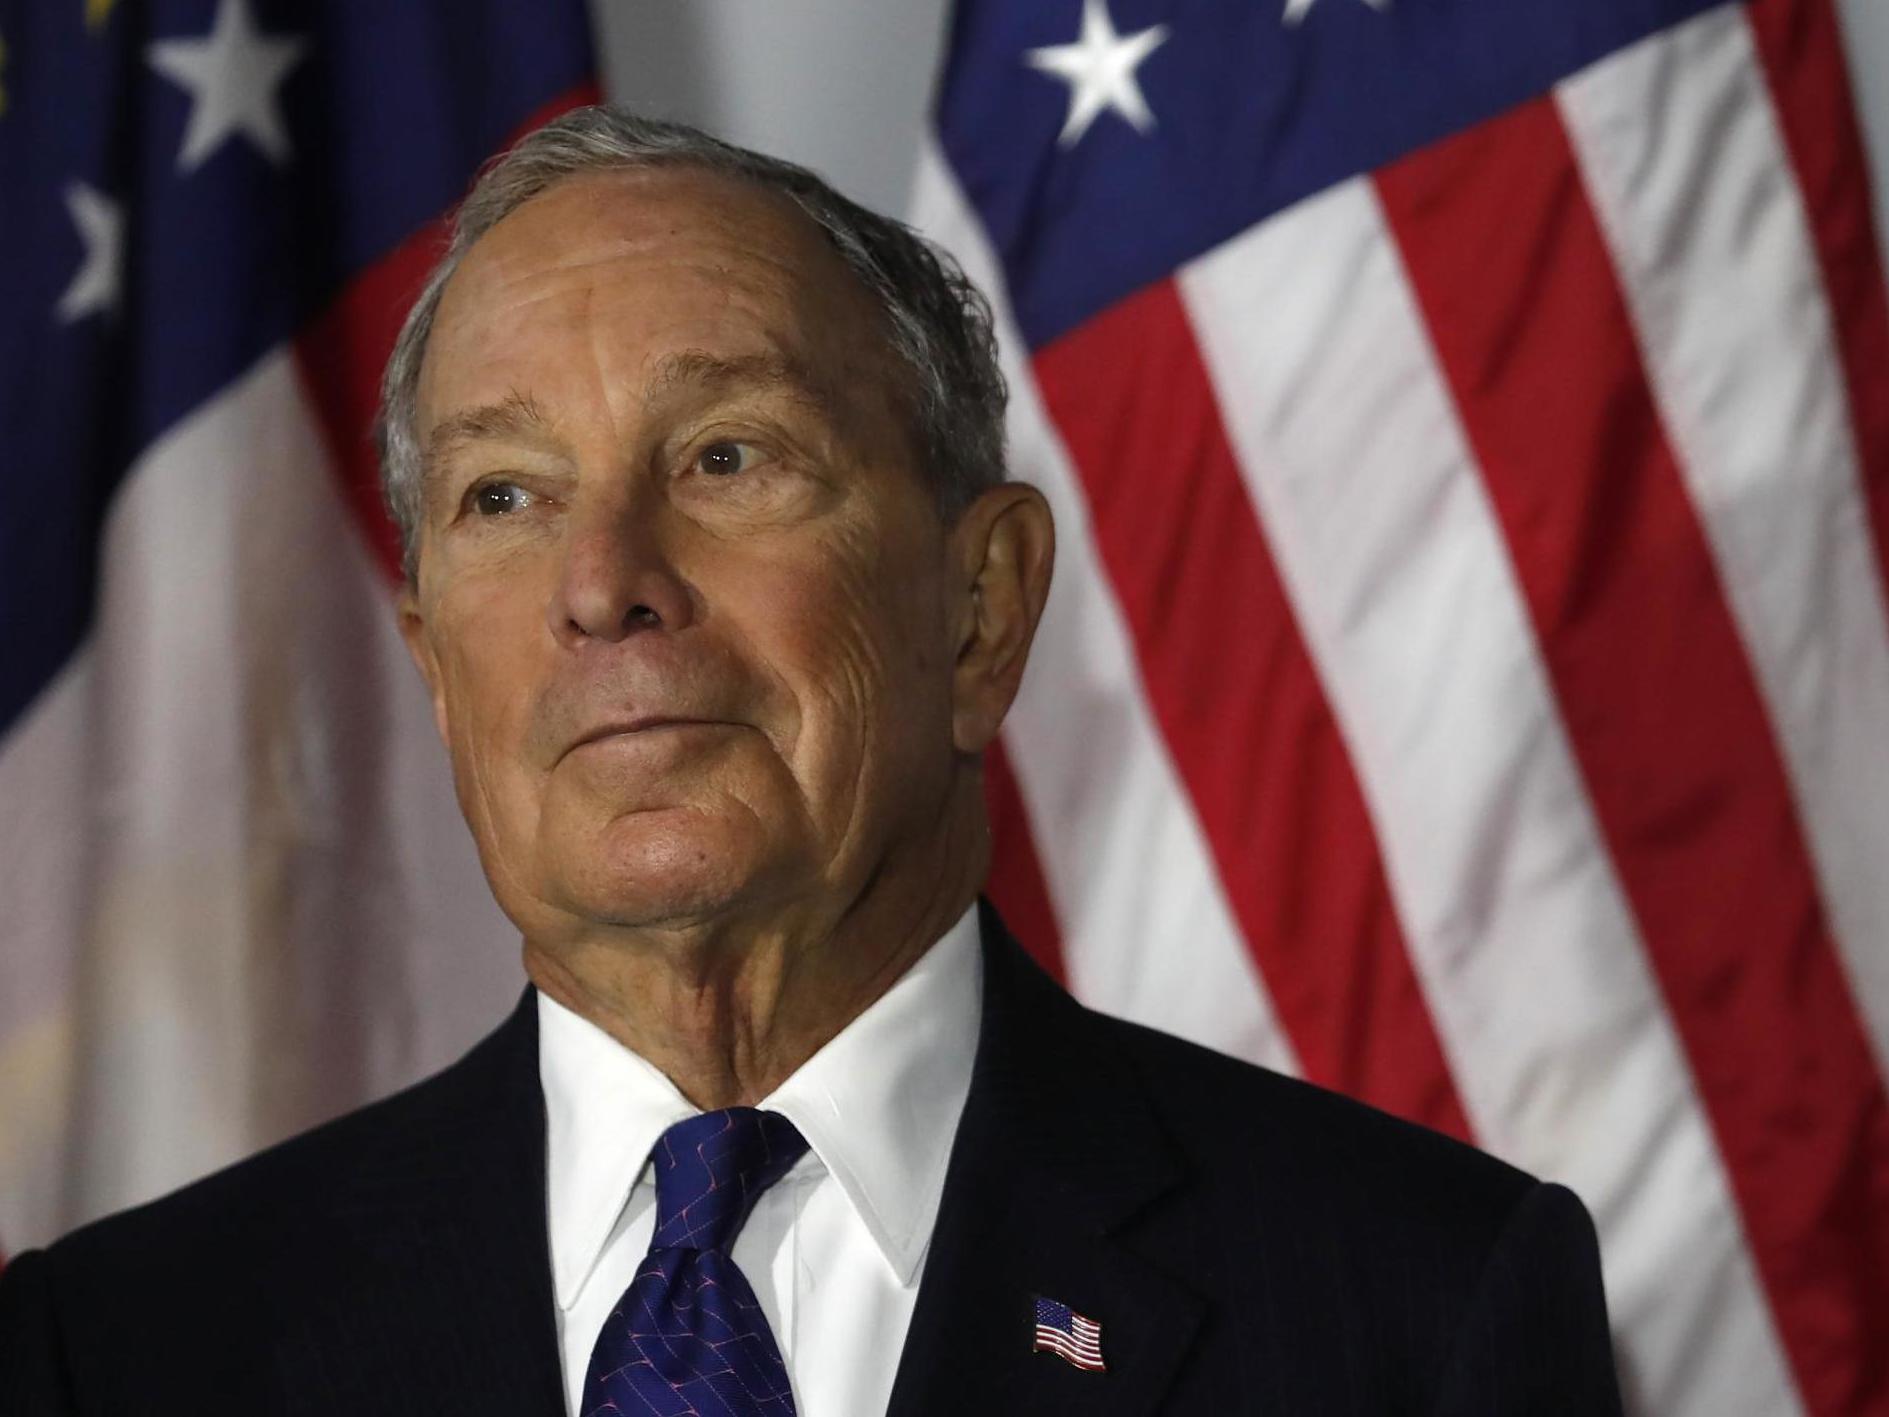 Michael Bloomberg has outspent all other Democratic candidates in his contributions